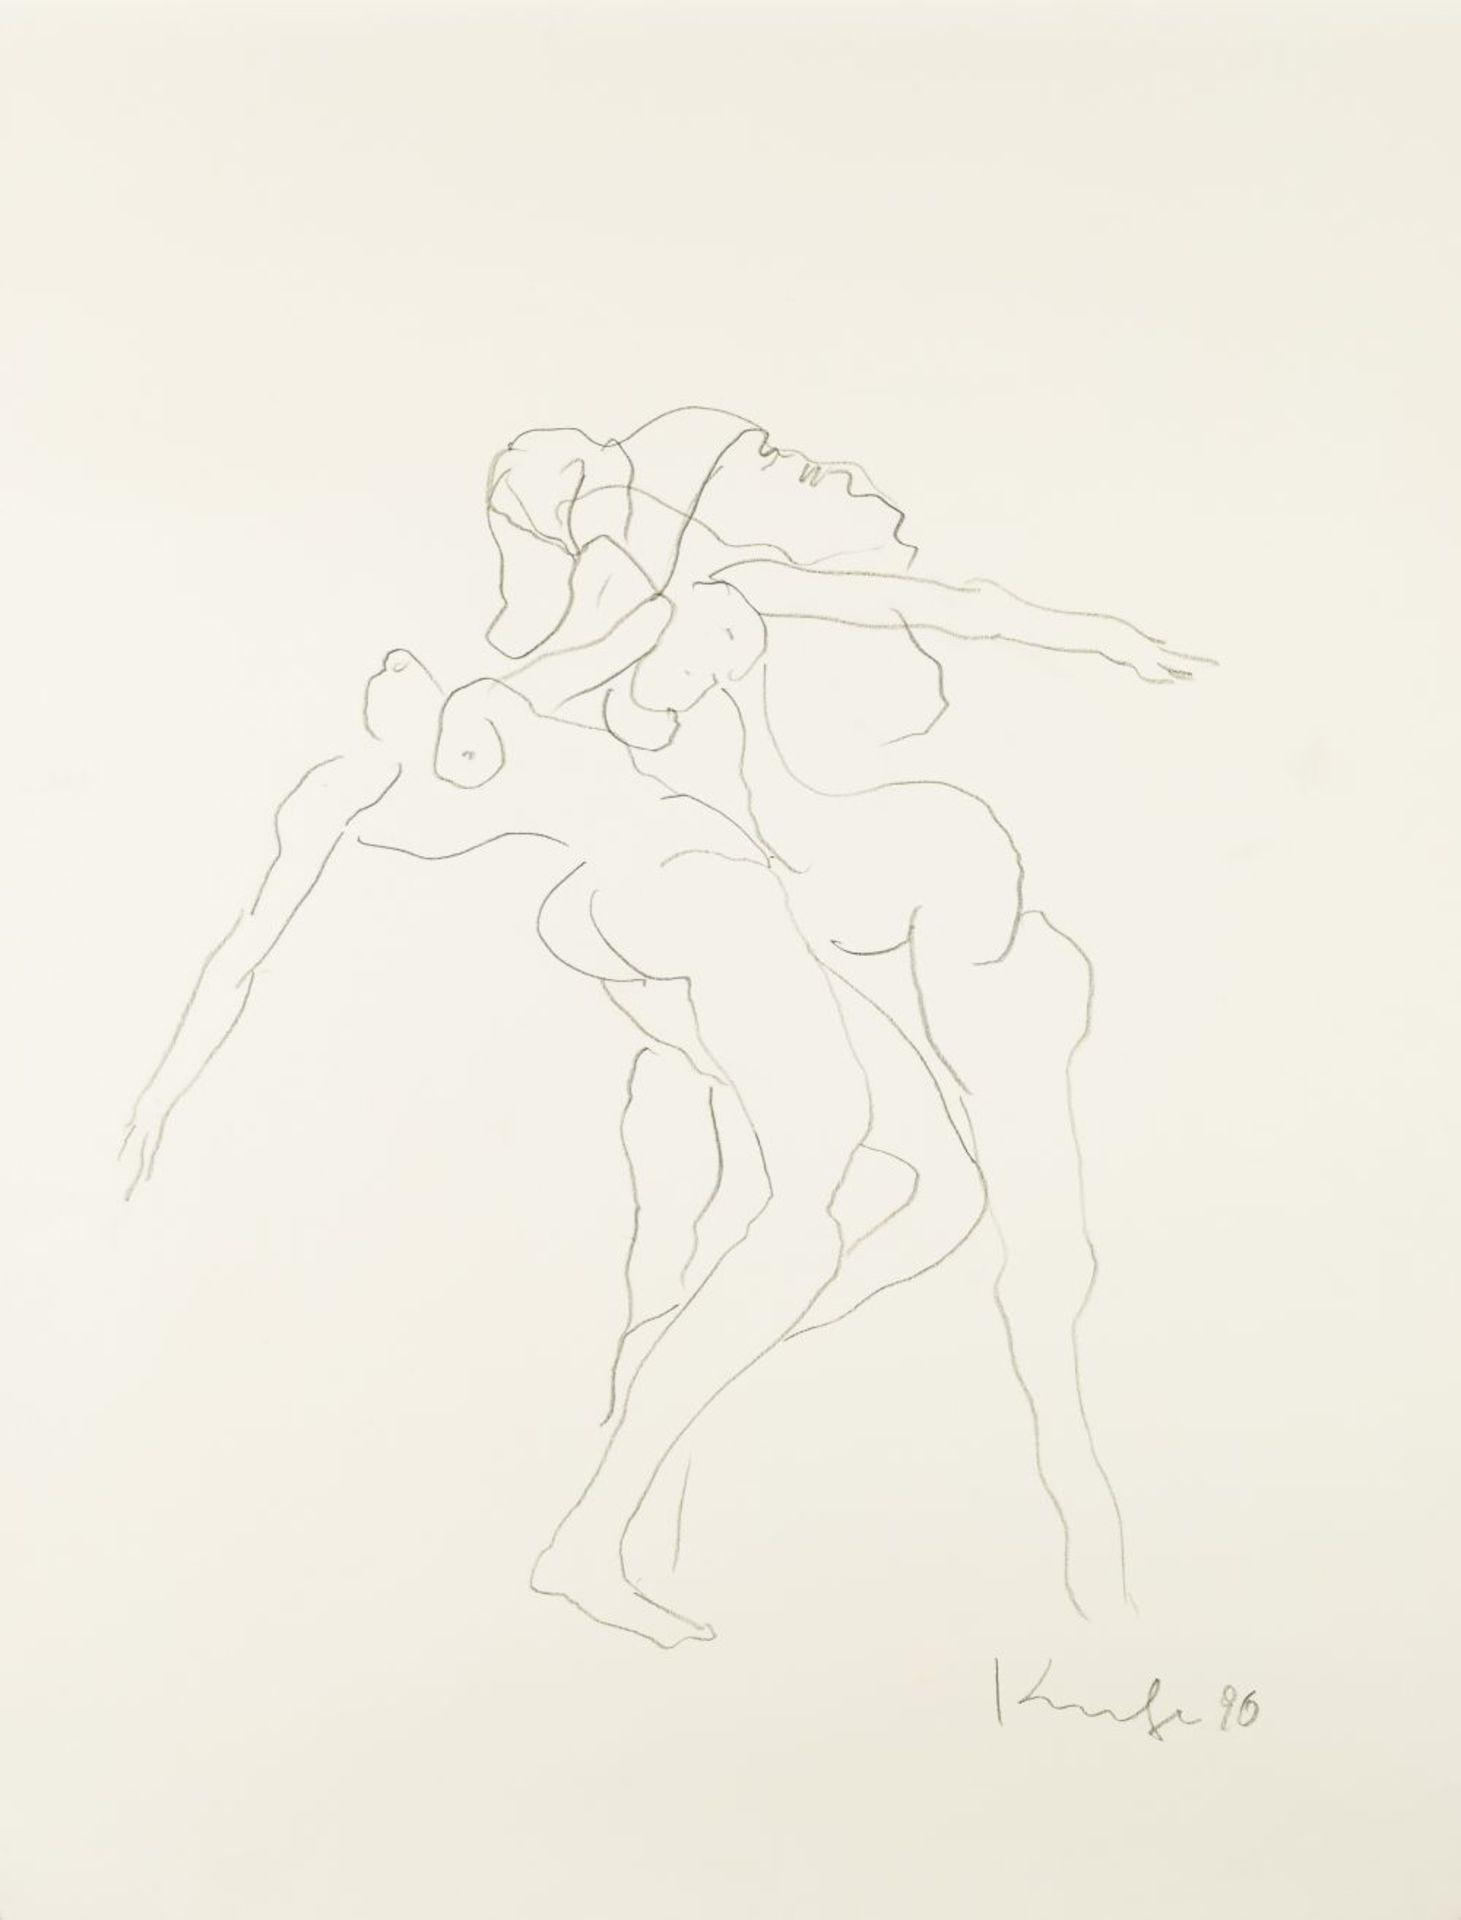 Two Dancers, (19)96 Pencil on paper Signed and dated lower right 25,6 x 19,5 in Will be included